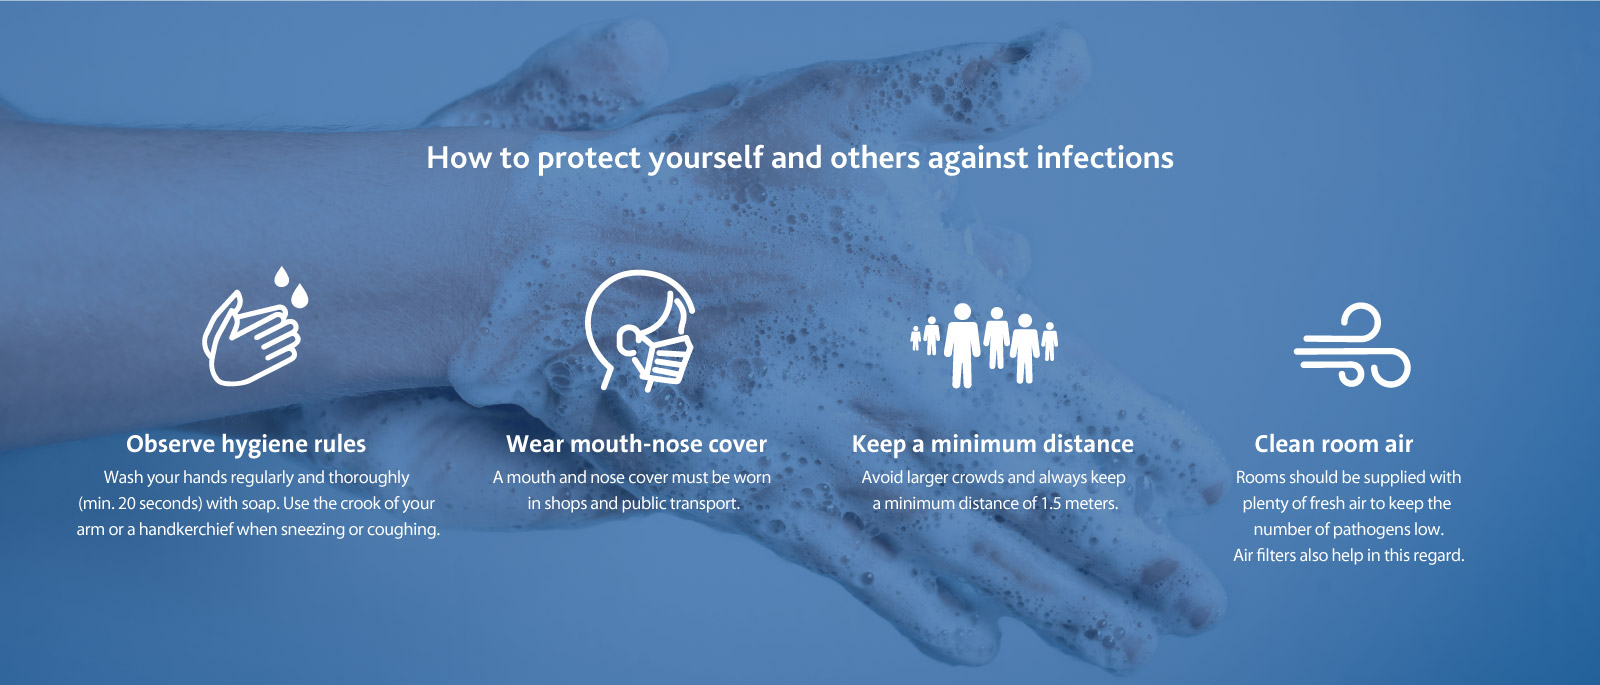 Virus protection – how to protect yourself and others against infections